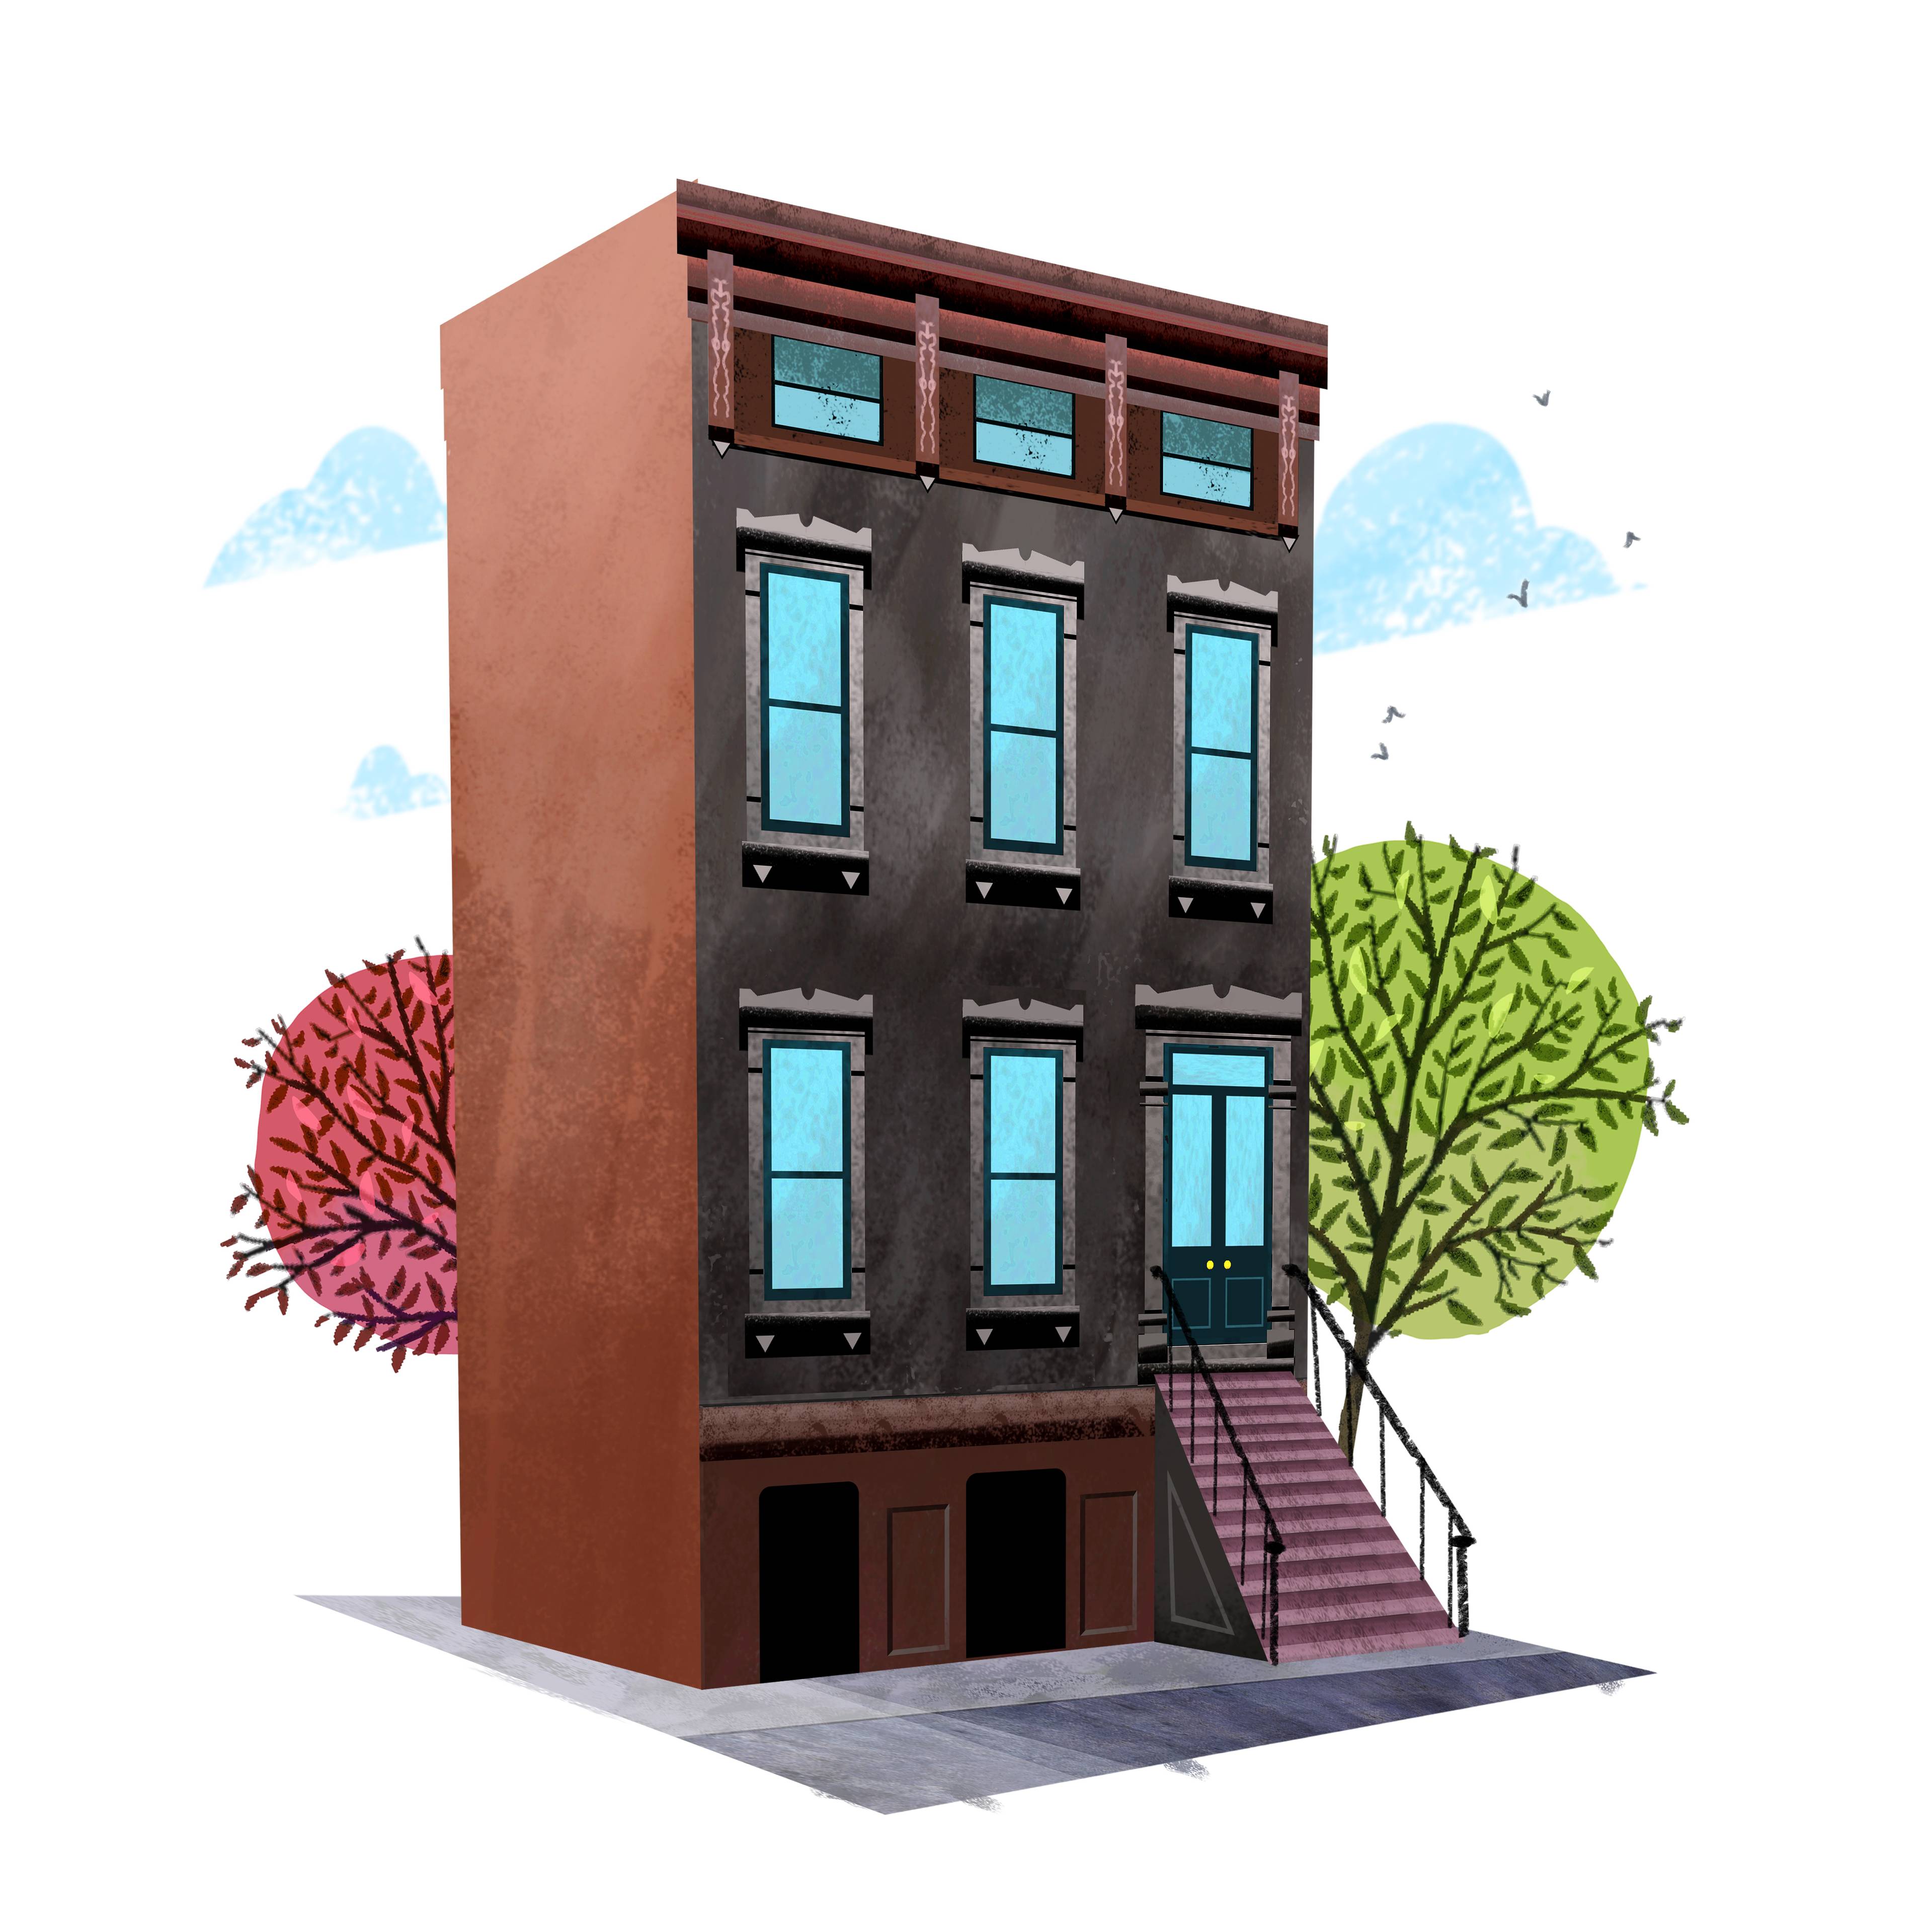 RENOVATED 2 FAMILY TOWNHOUSE IN BED-STUY!